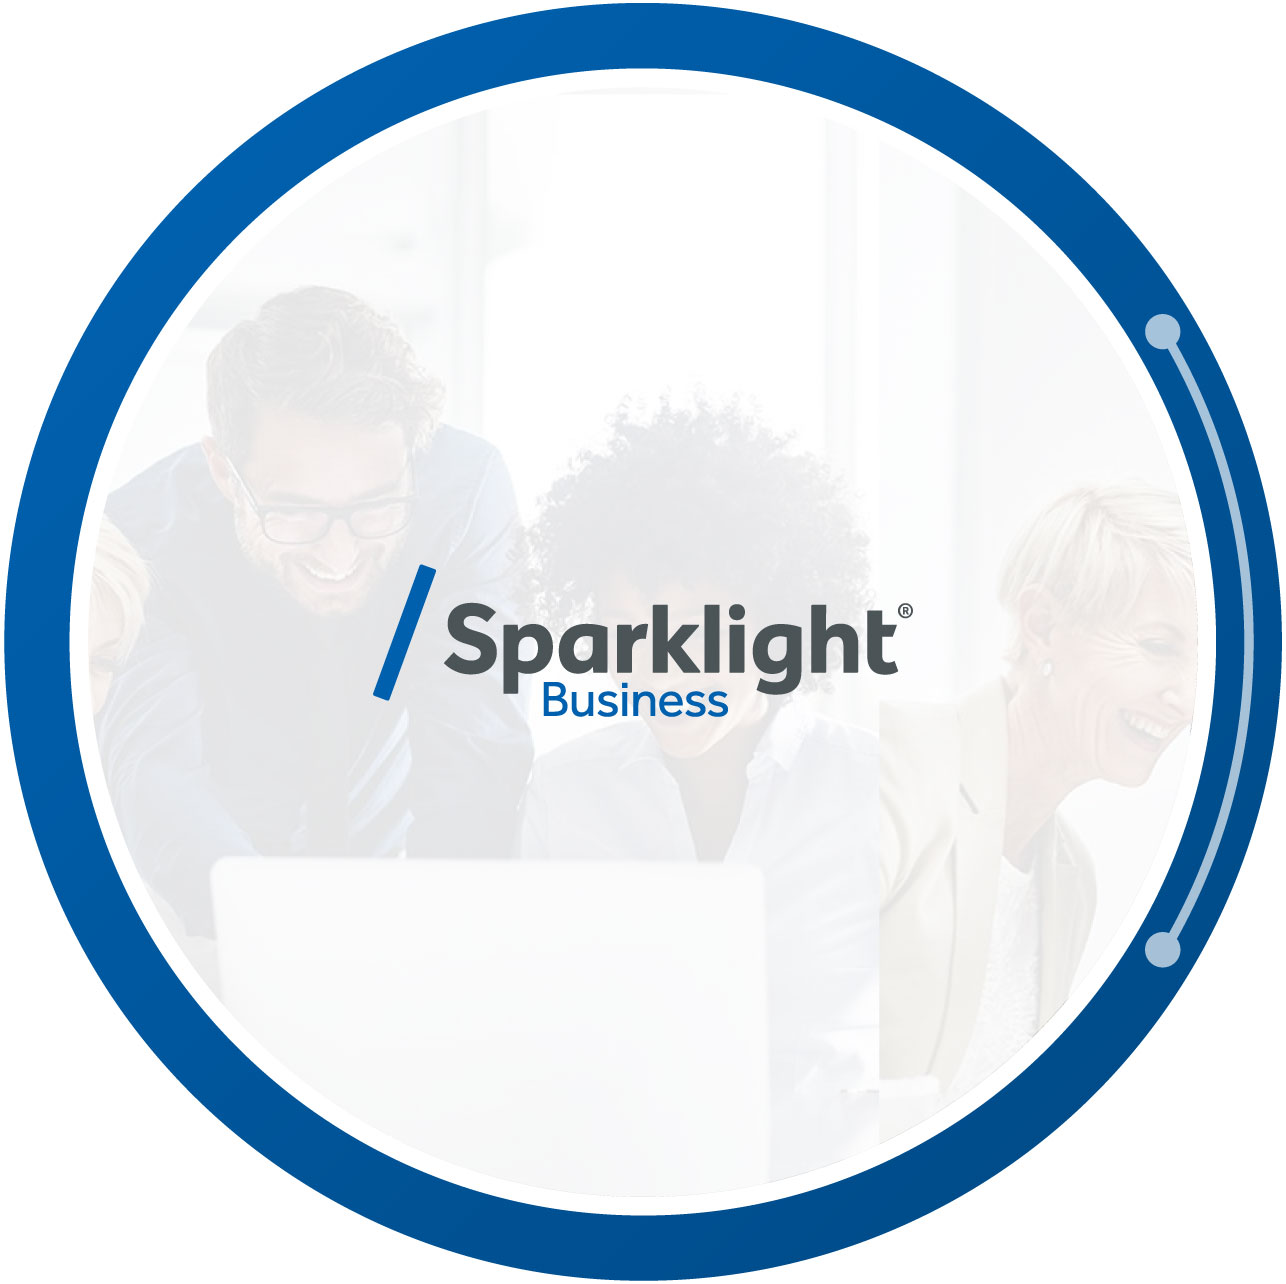 Sparklight business logo with an image in the background of a team working together, smiling, and reviewing information on a laptop